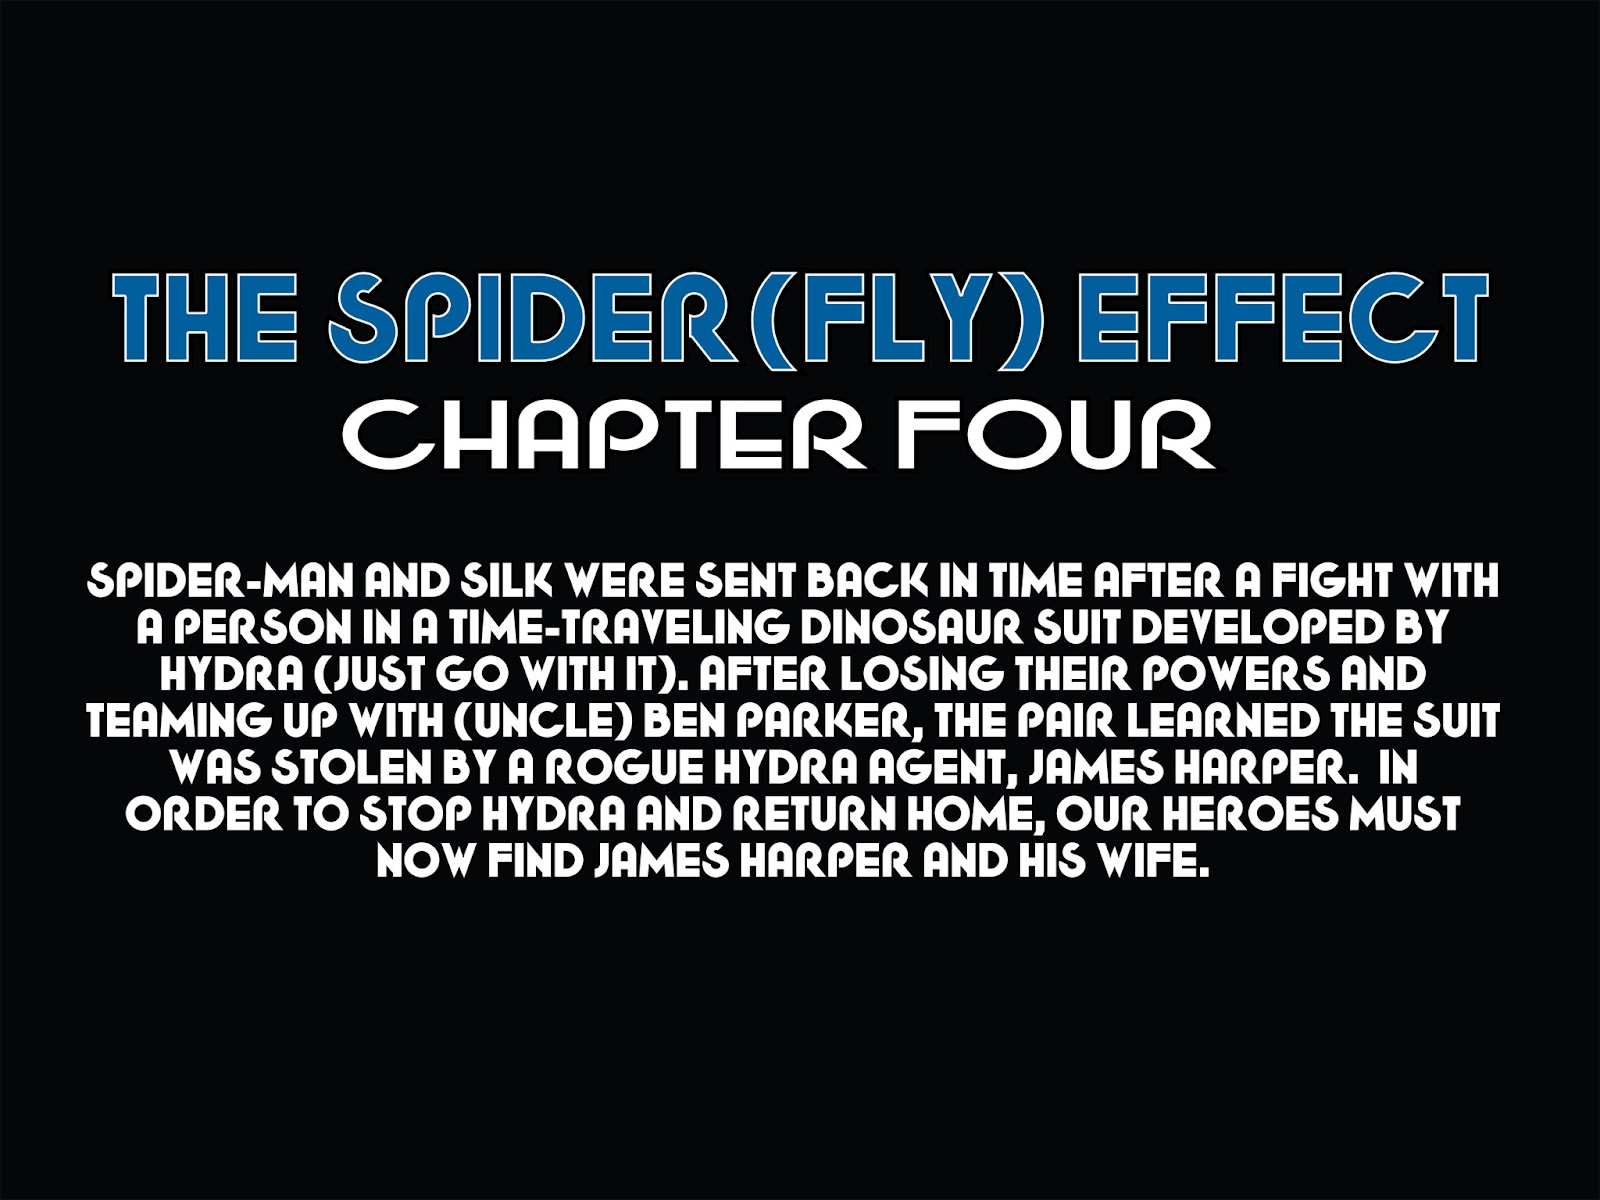 The Amazing Spider-Man & Silk: The Spider(fly) Effect (Infinite Comics) issue 4 - Page 7